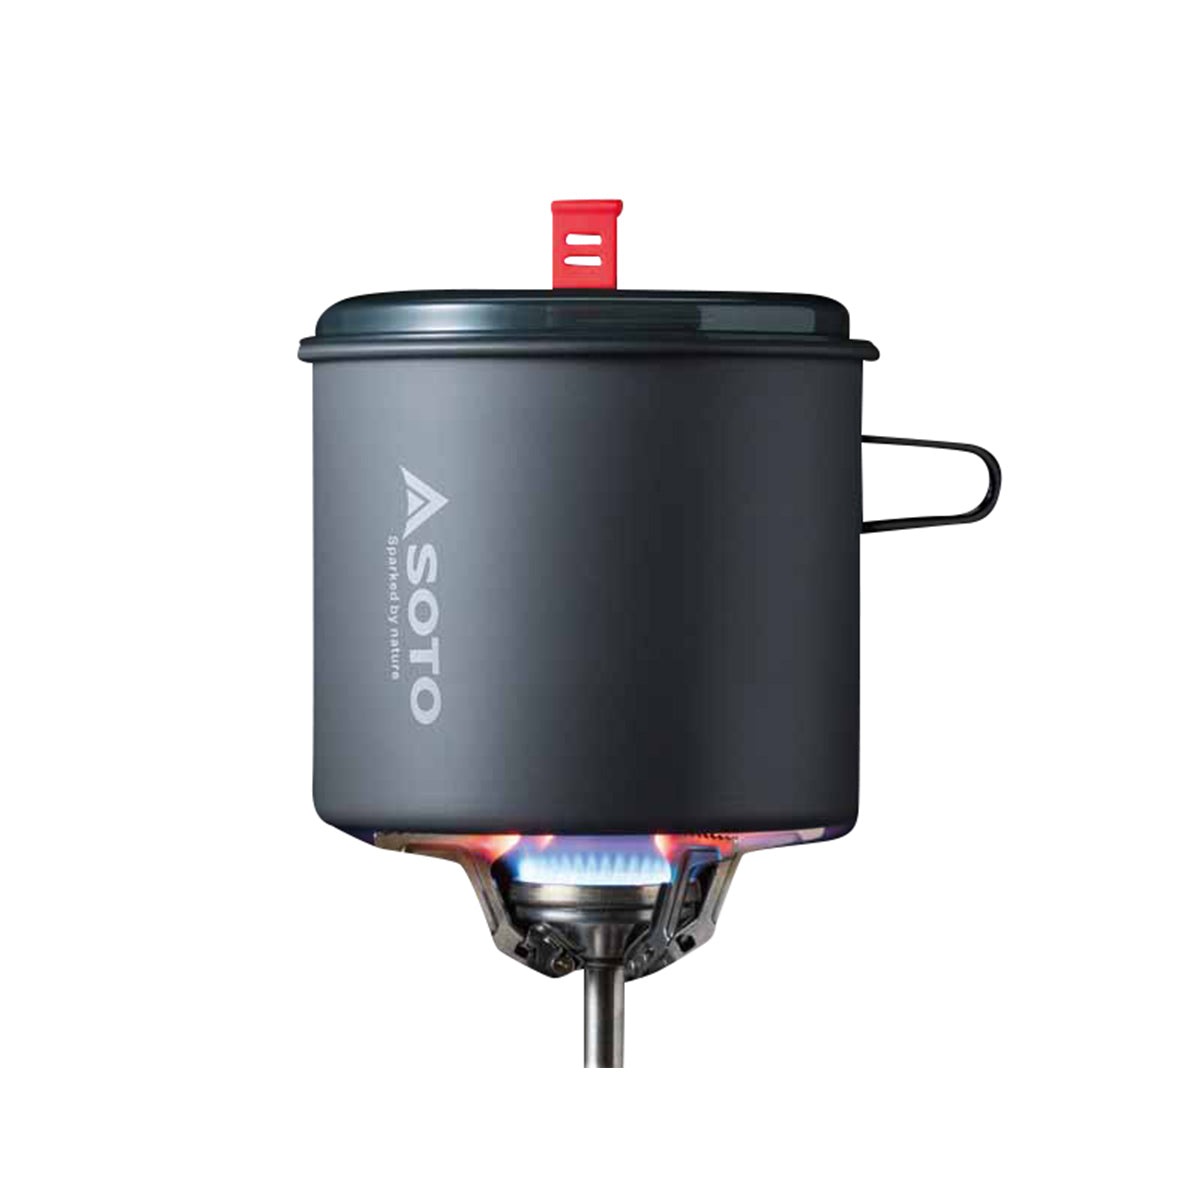 Soto New River Pot + Amicus Stove System by Soto | Camping - goHUNT Shop